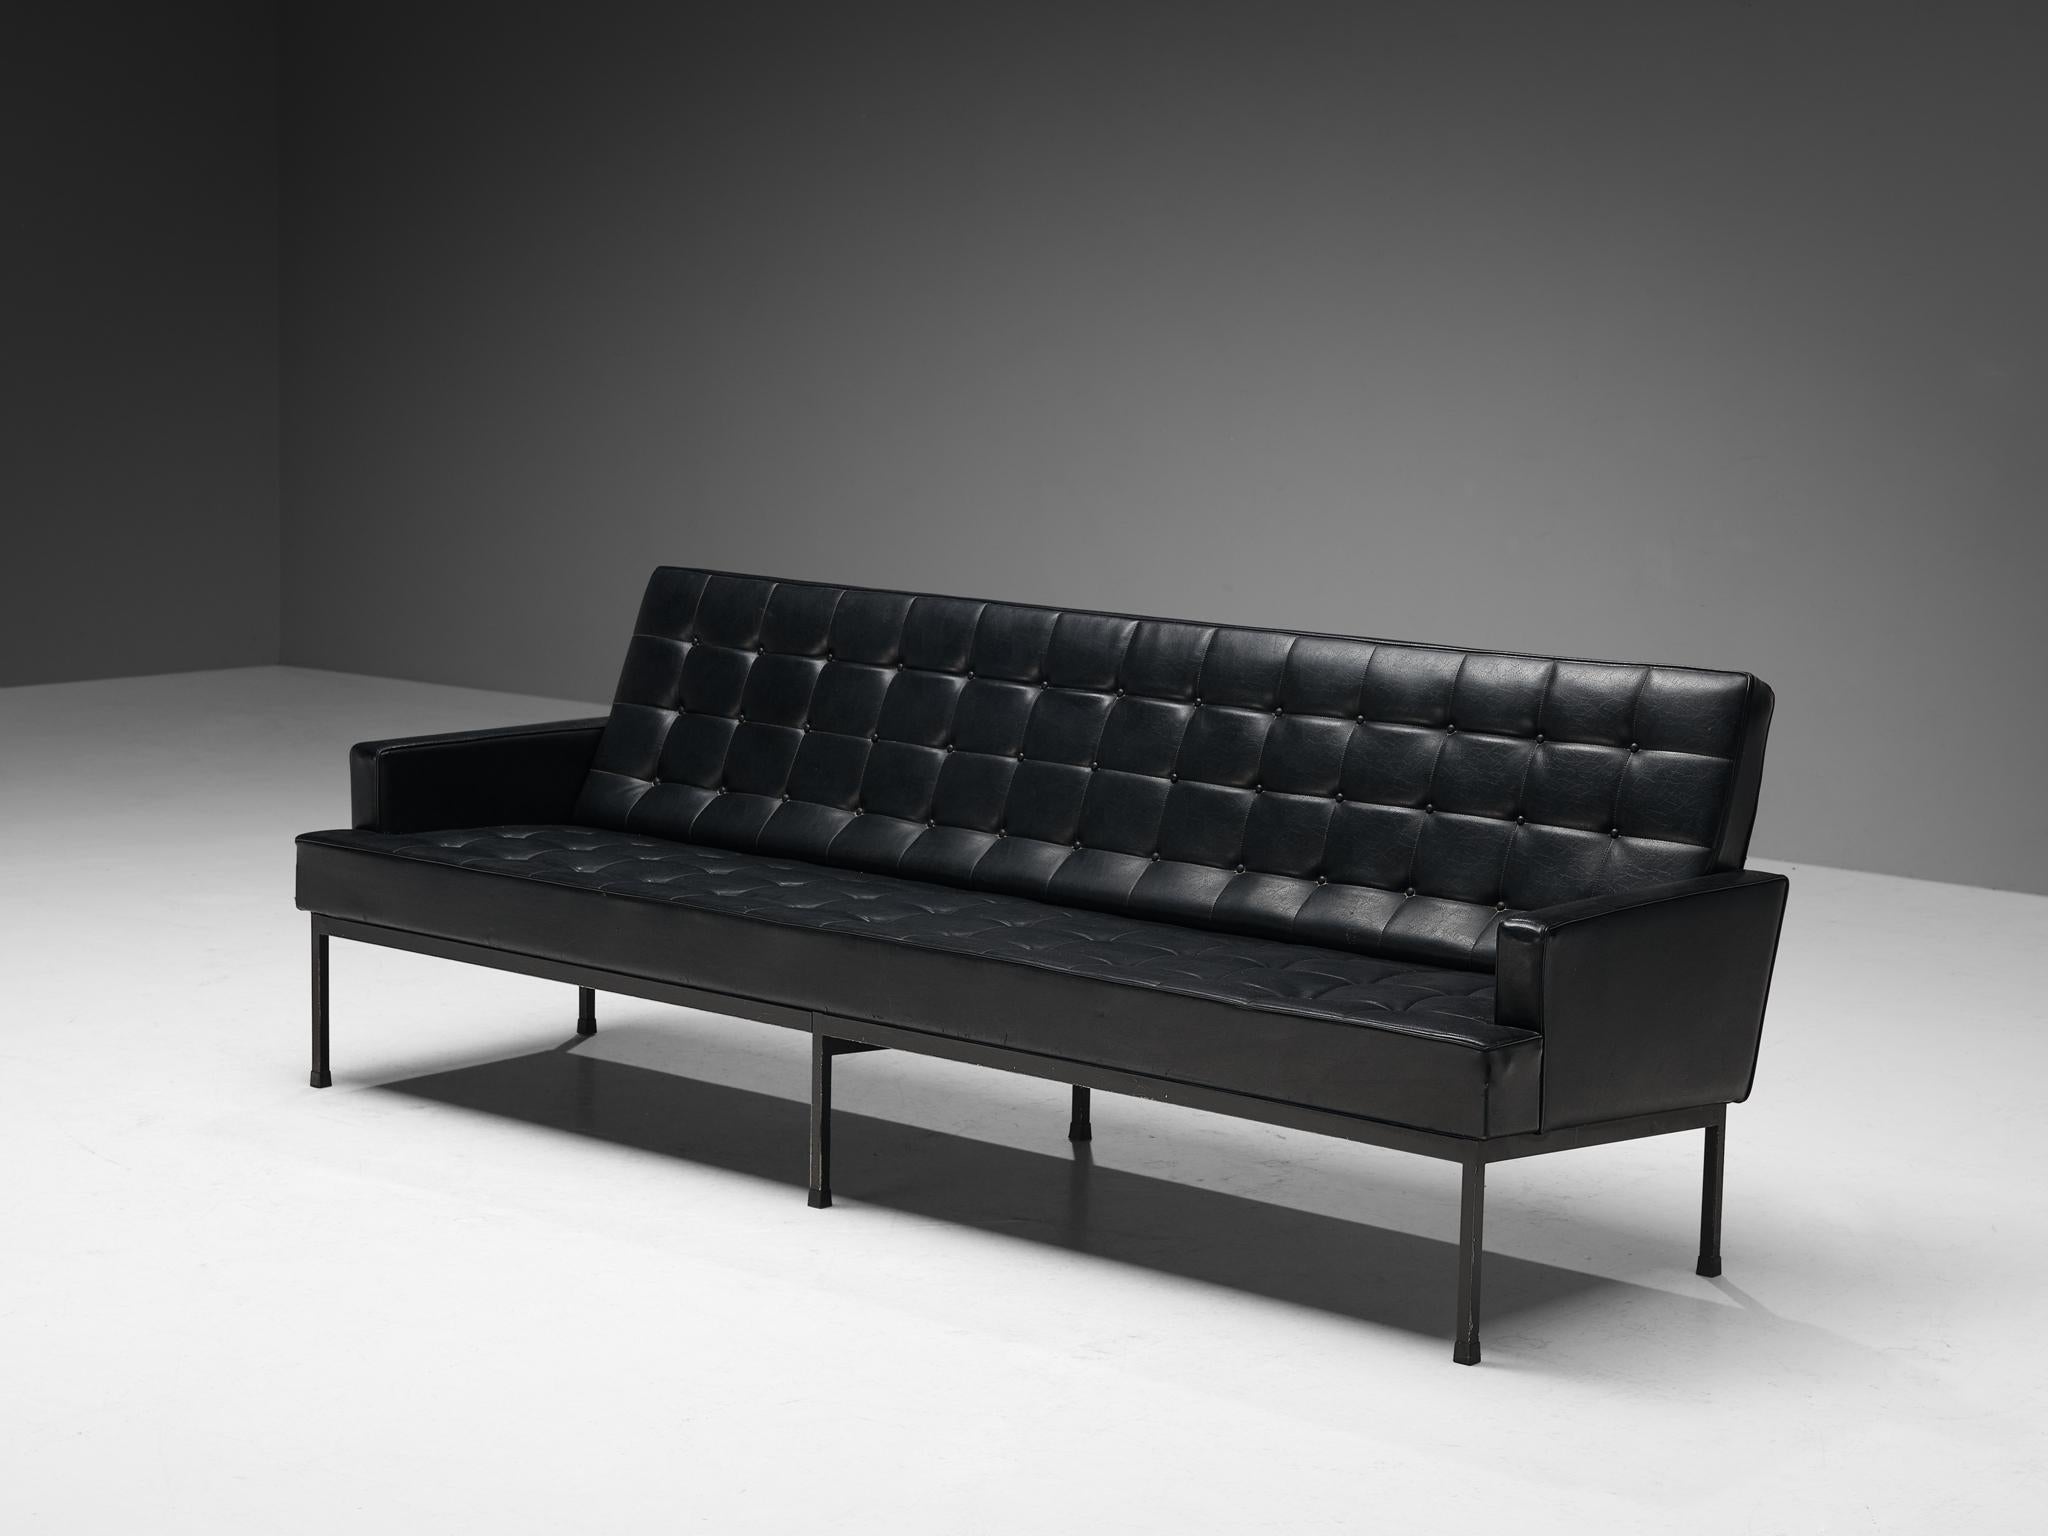 Sofa, leather, lacquered metal, Northern Europe, 1970s

The design is characterized by a solid construction based on sharp lines and geometrical shapes that are noticeable in the body of the seat and the black lacquered metal base, underlining the